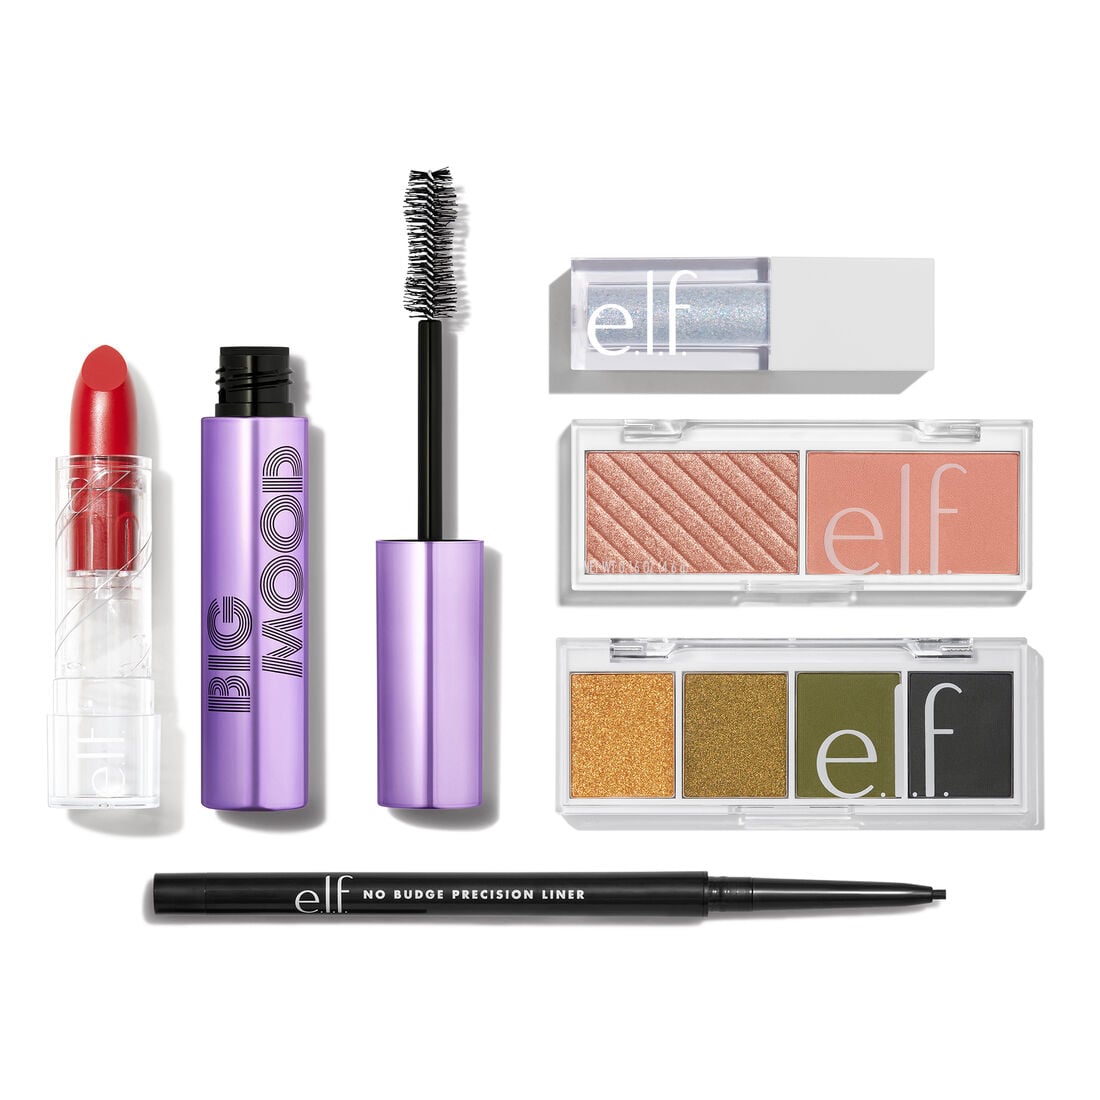 E.l.f. Cosmetics Is Increasing Prices for Some Products